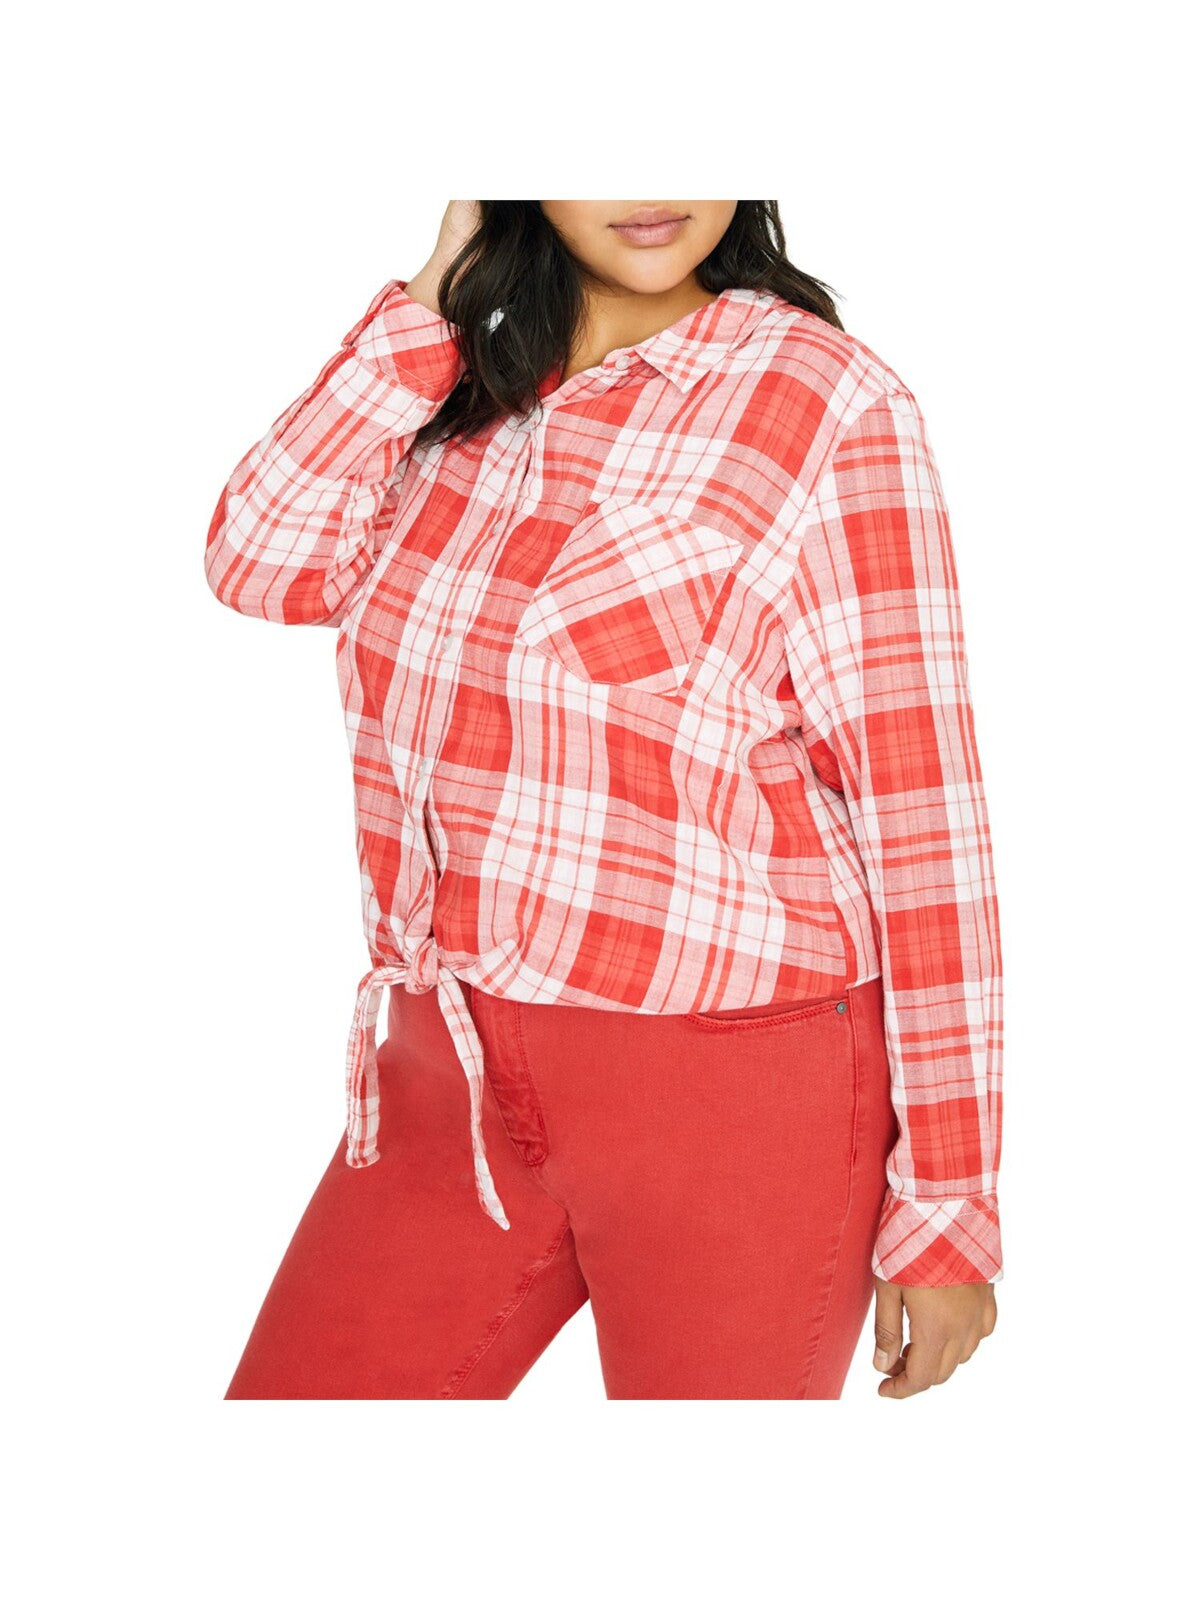 SANCTUARY Womens Red Pocketed Tie Front Plaid Cuffed Sleeve Collared Button Up Top Plus 3X